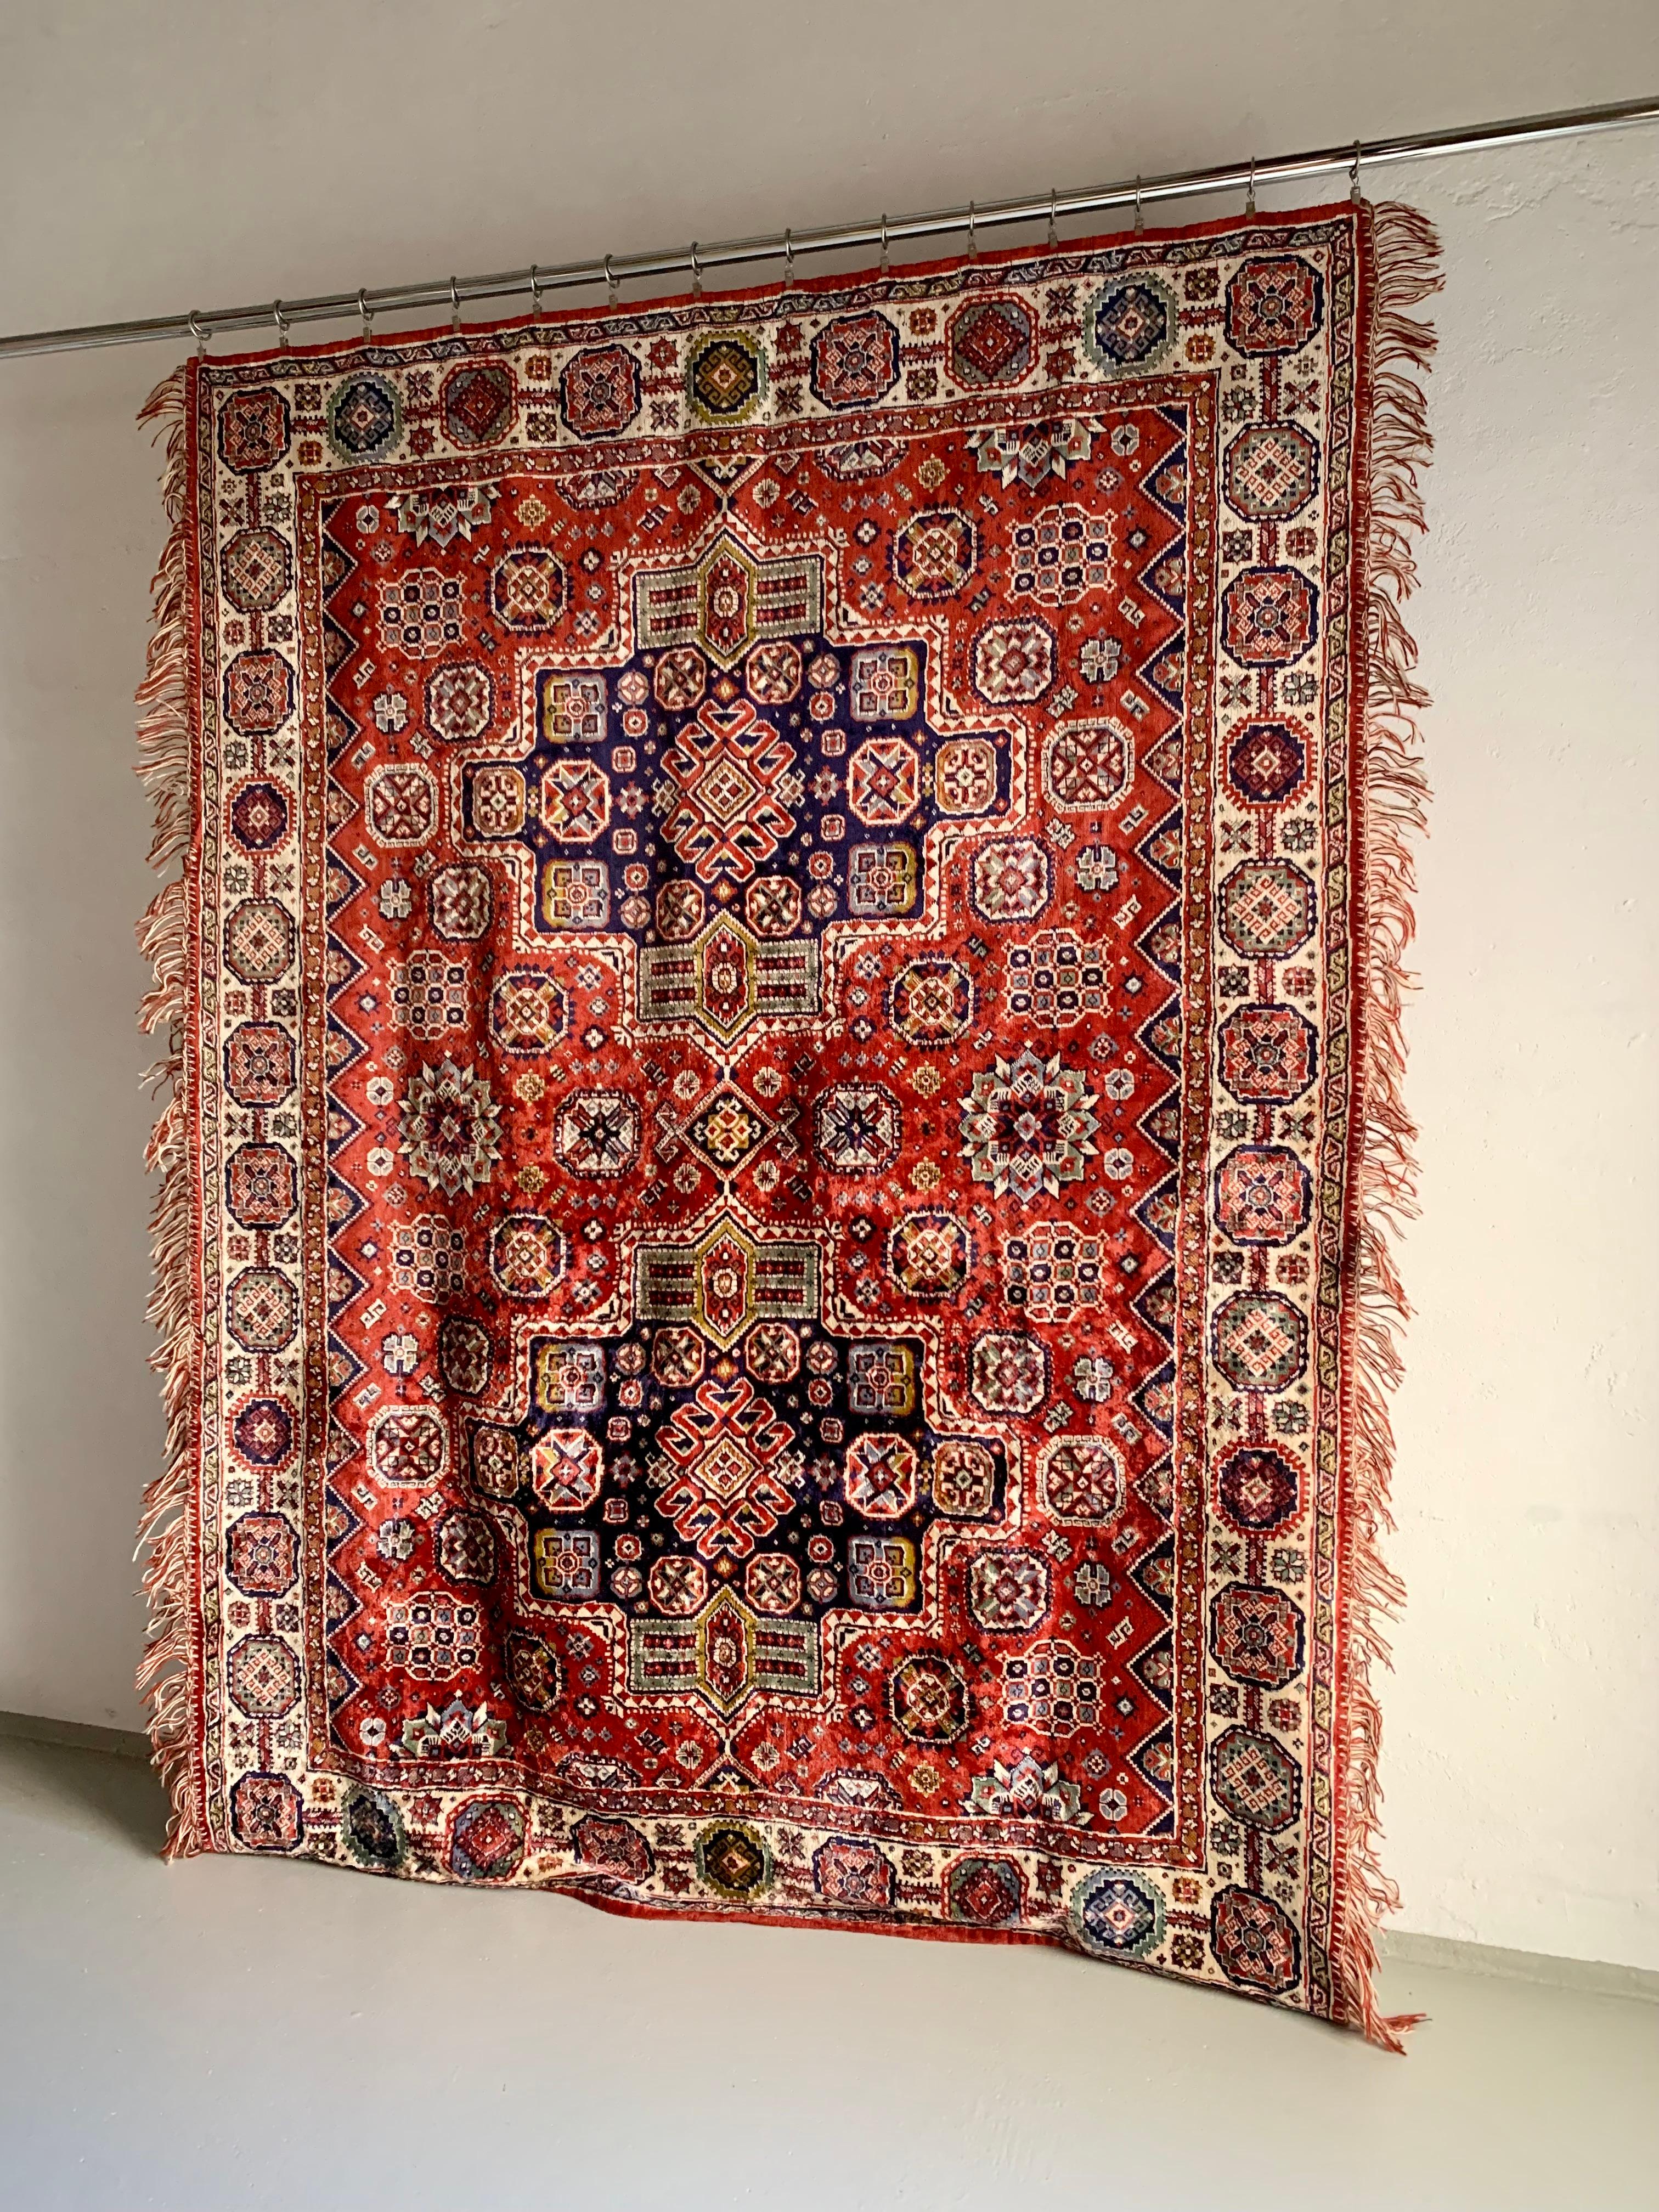 Vintage oriental carpet or duvet cover, made of silk or silk-wool blend. Beautiful play of the colors, intense and wide color range. I can't define the production period, unfortunately.